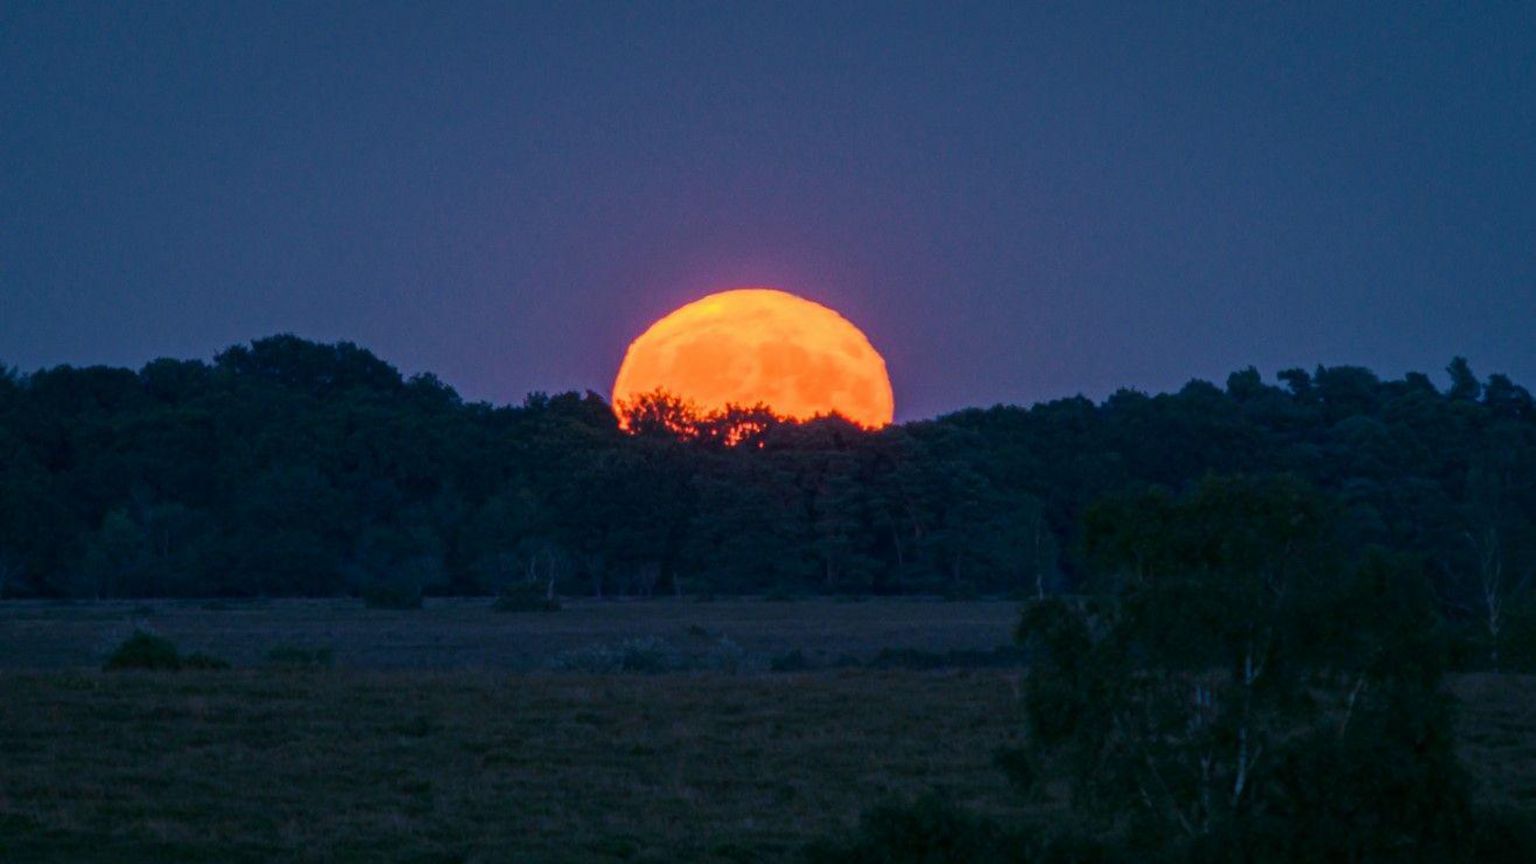 A bright orange moon poking over the silhouettes of trees